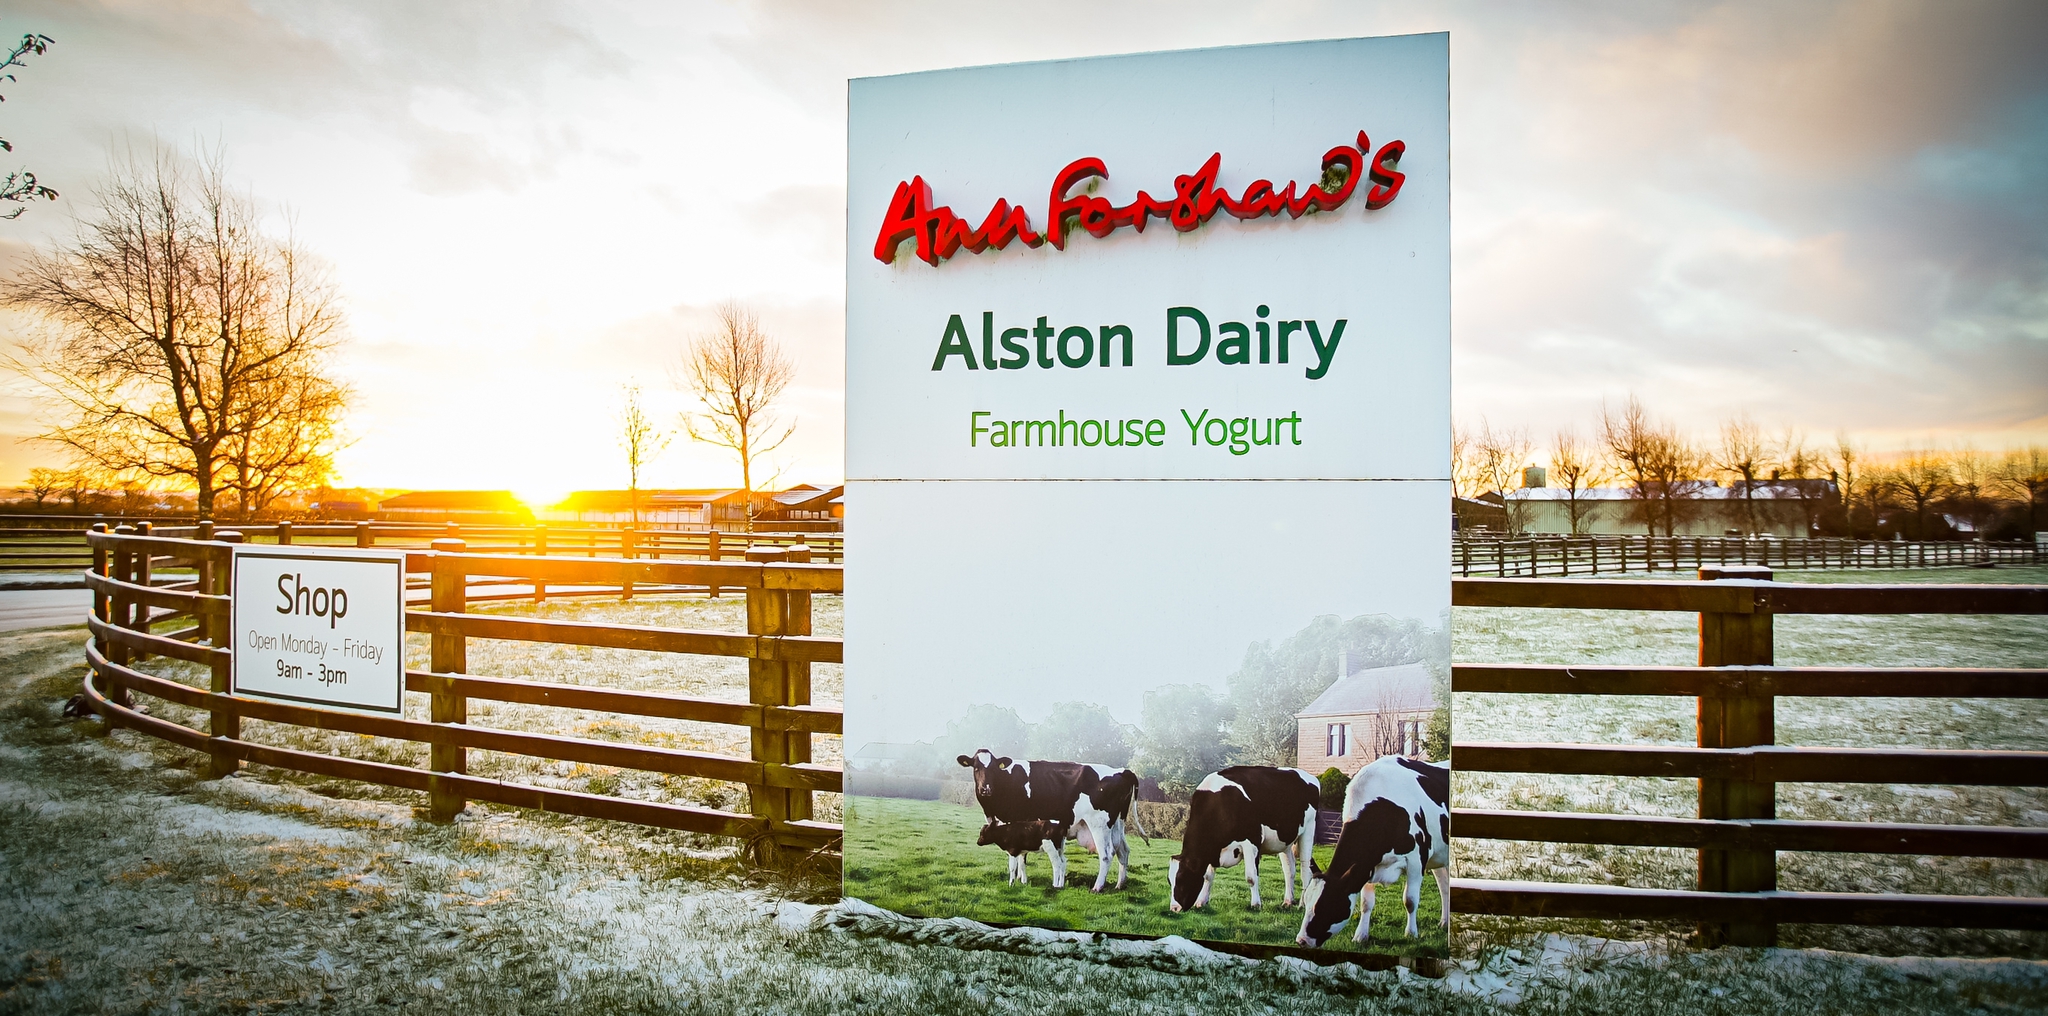 James Hall Group of Companies acquires iconic Ann Forshaw’s Alston Dairy